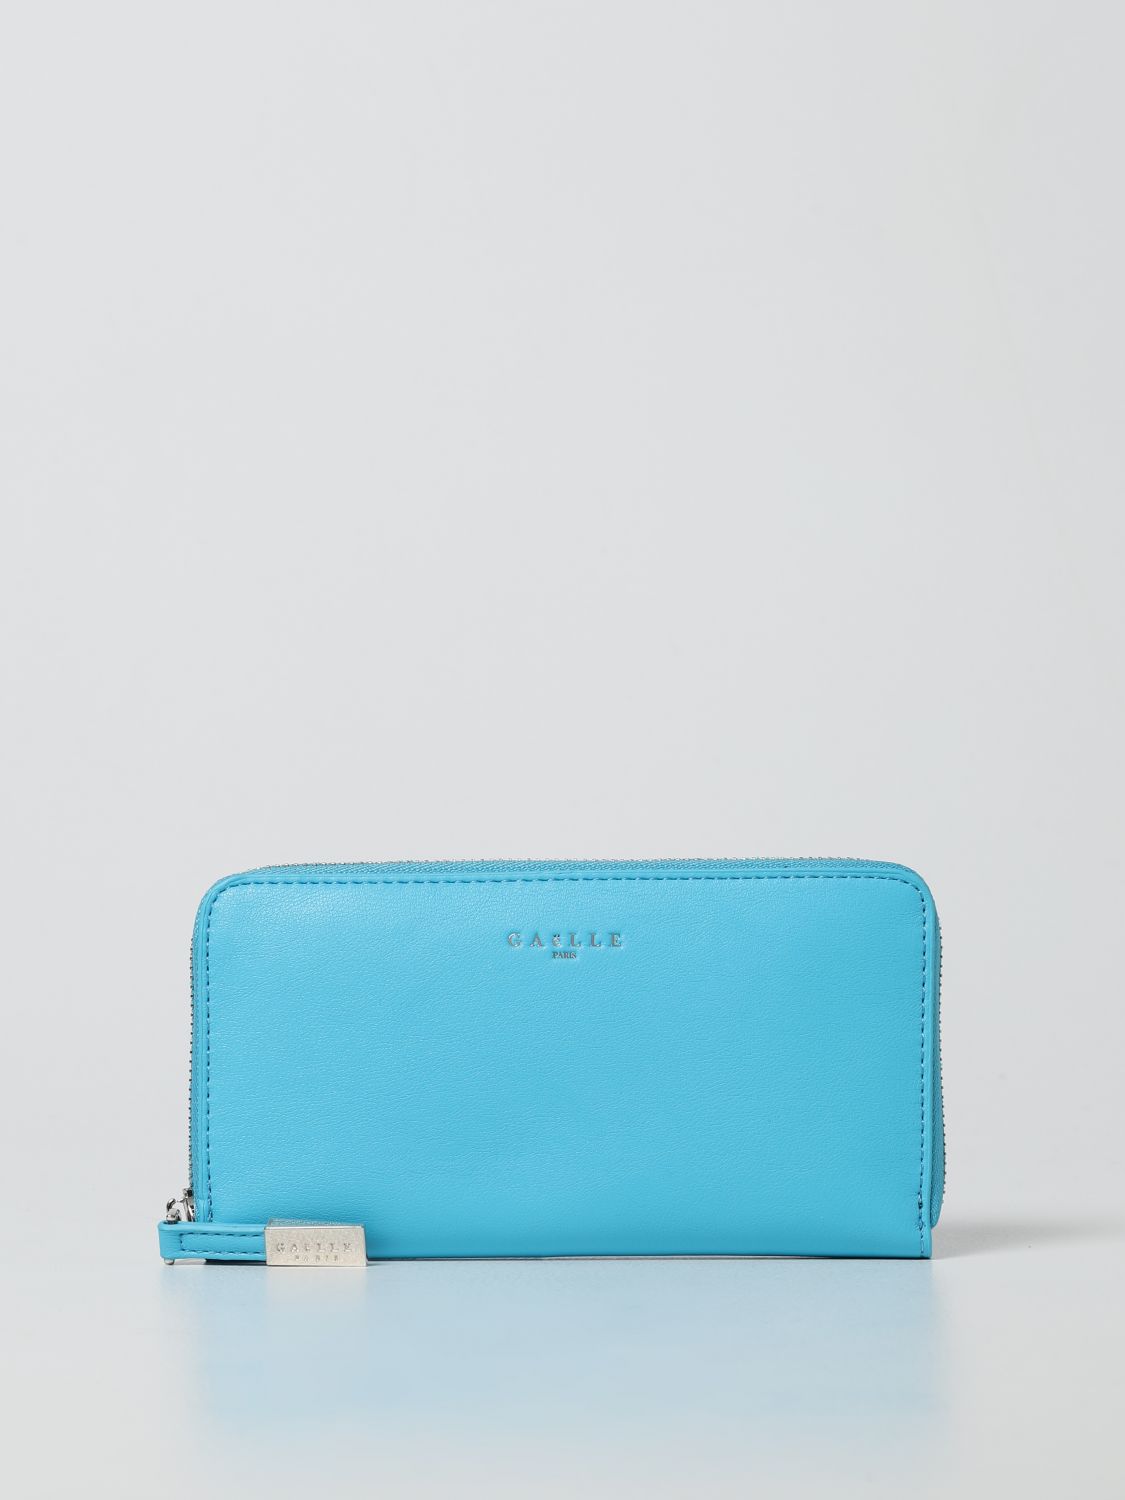 Gaelle Paris Purse In Synthetic Leather In Turquoise